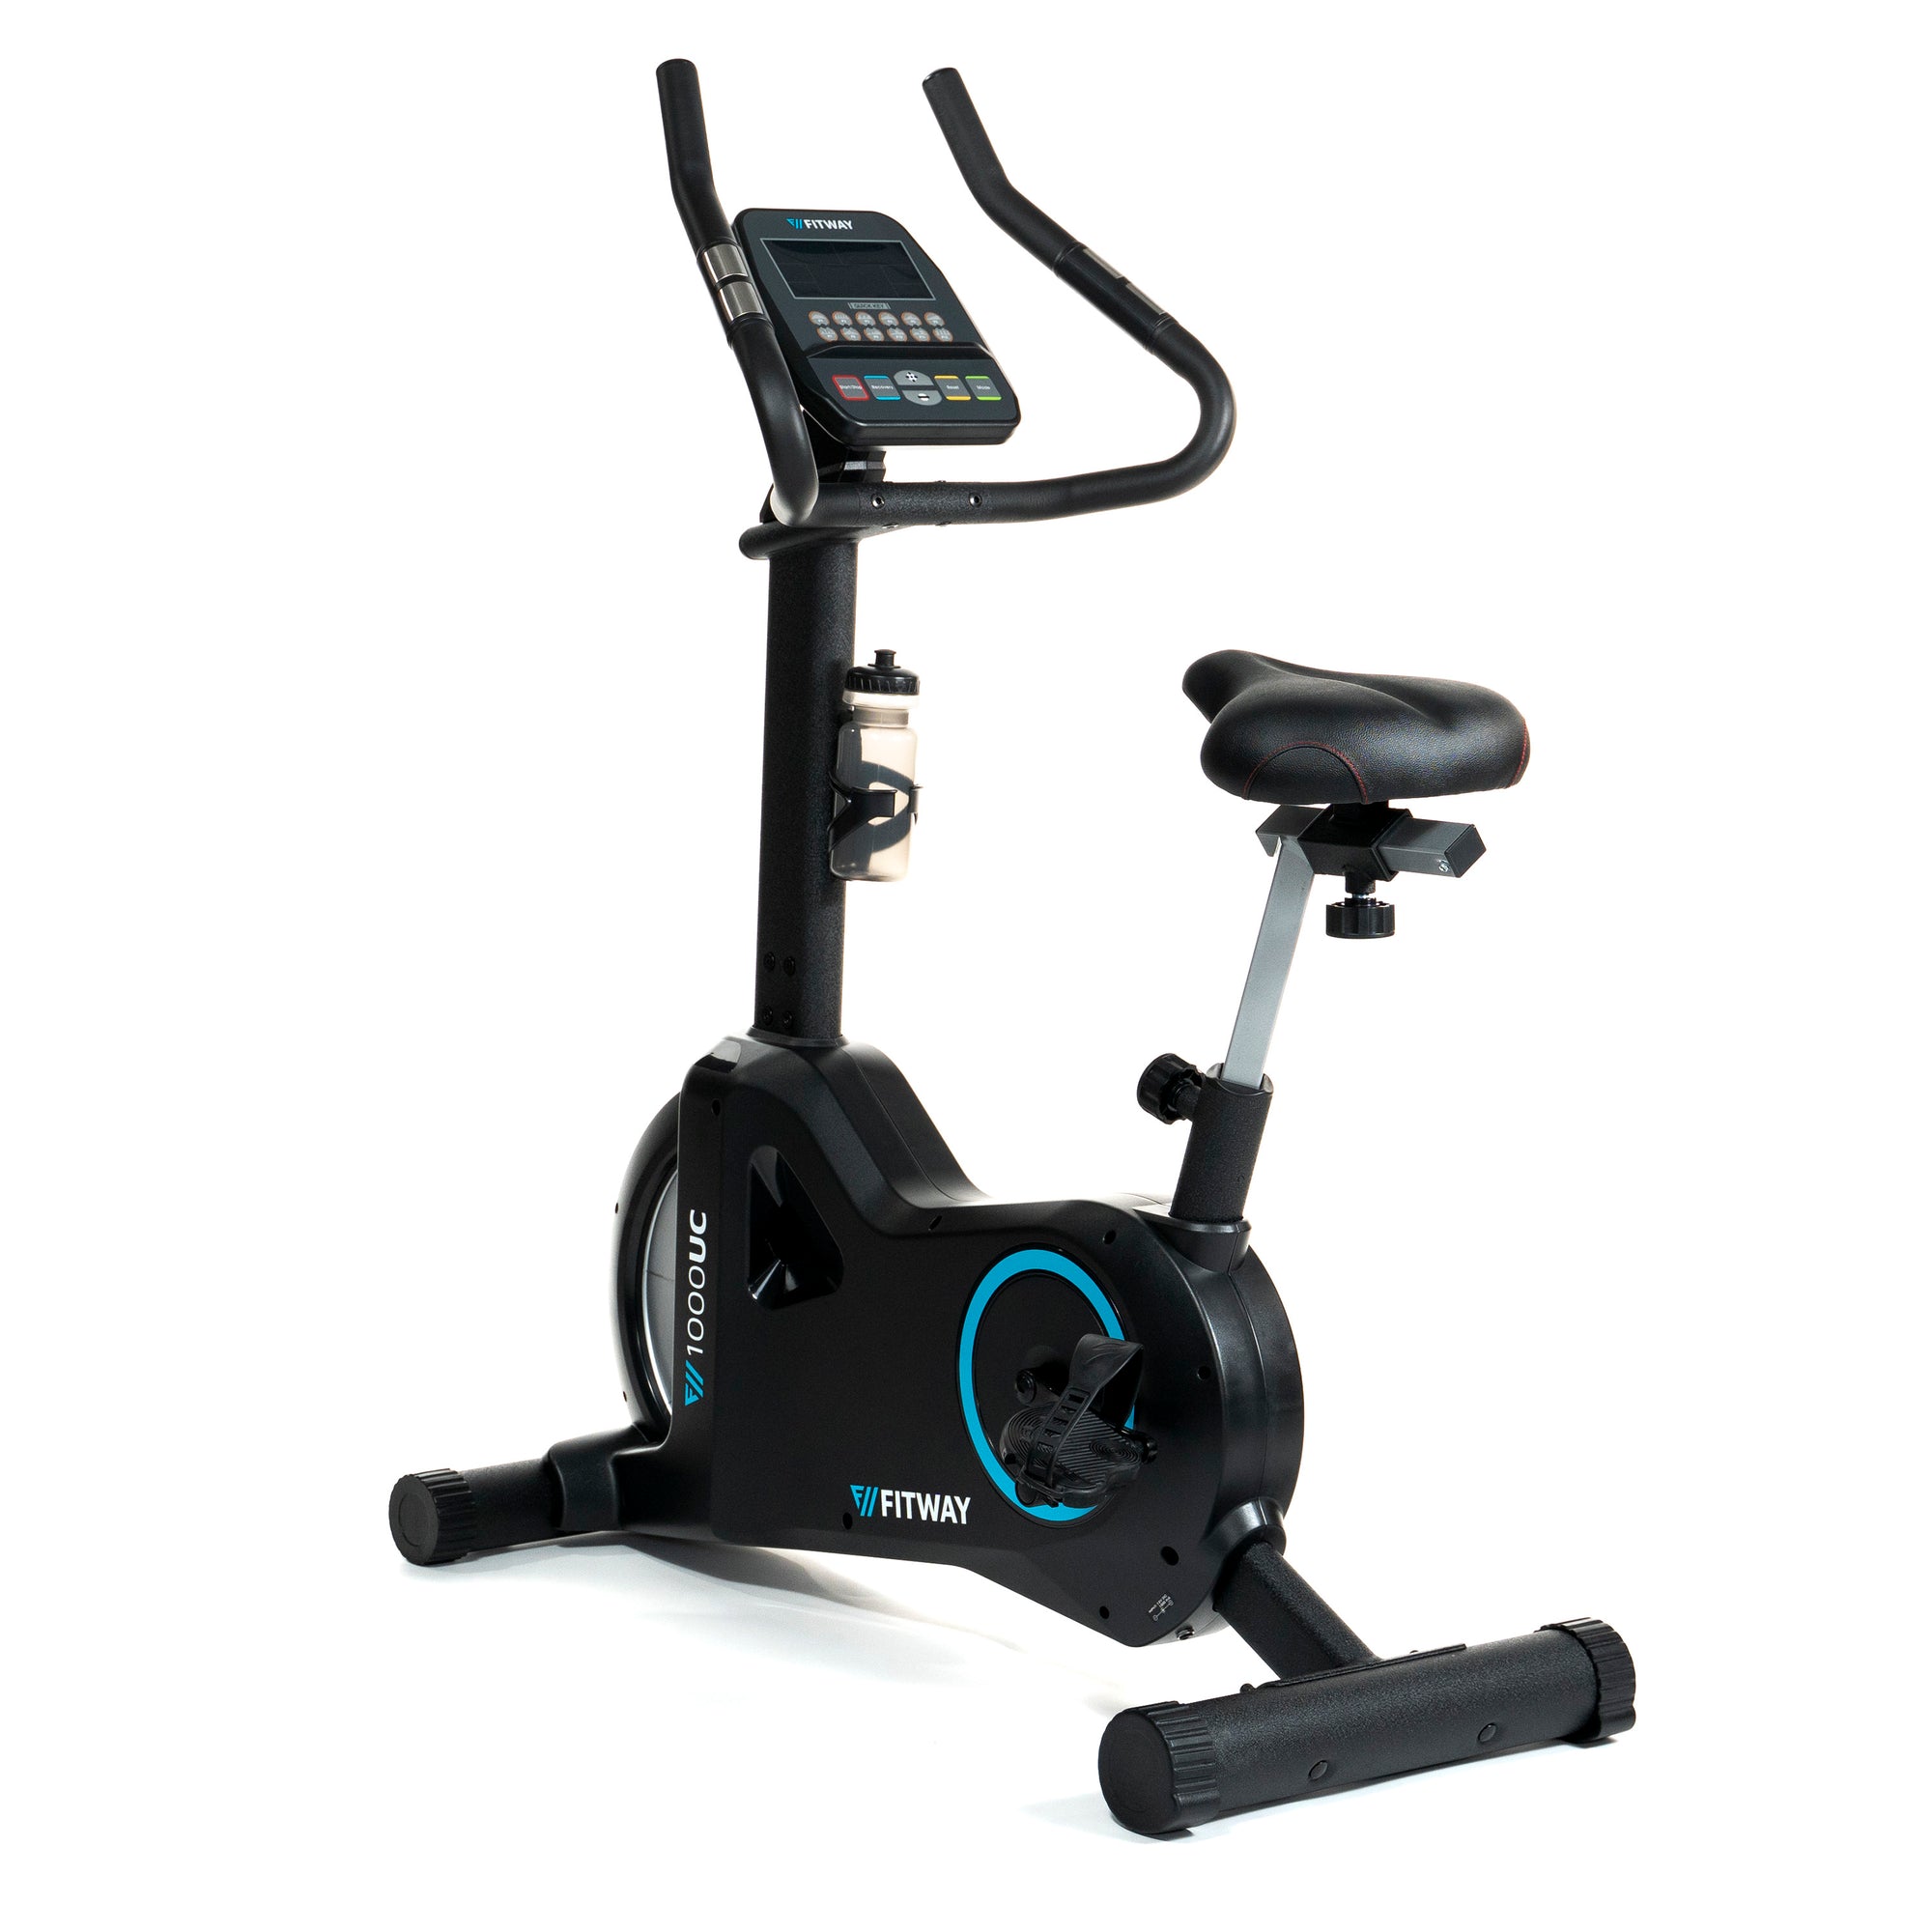 FitWay Equip. 1000UC Upright Cycle full view